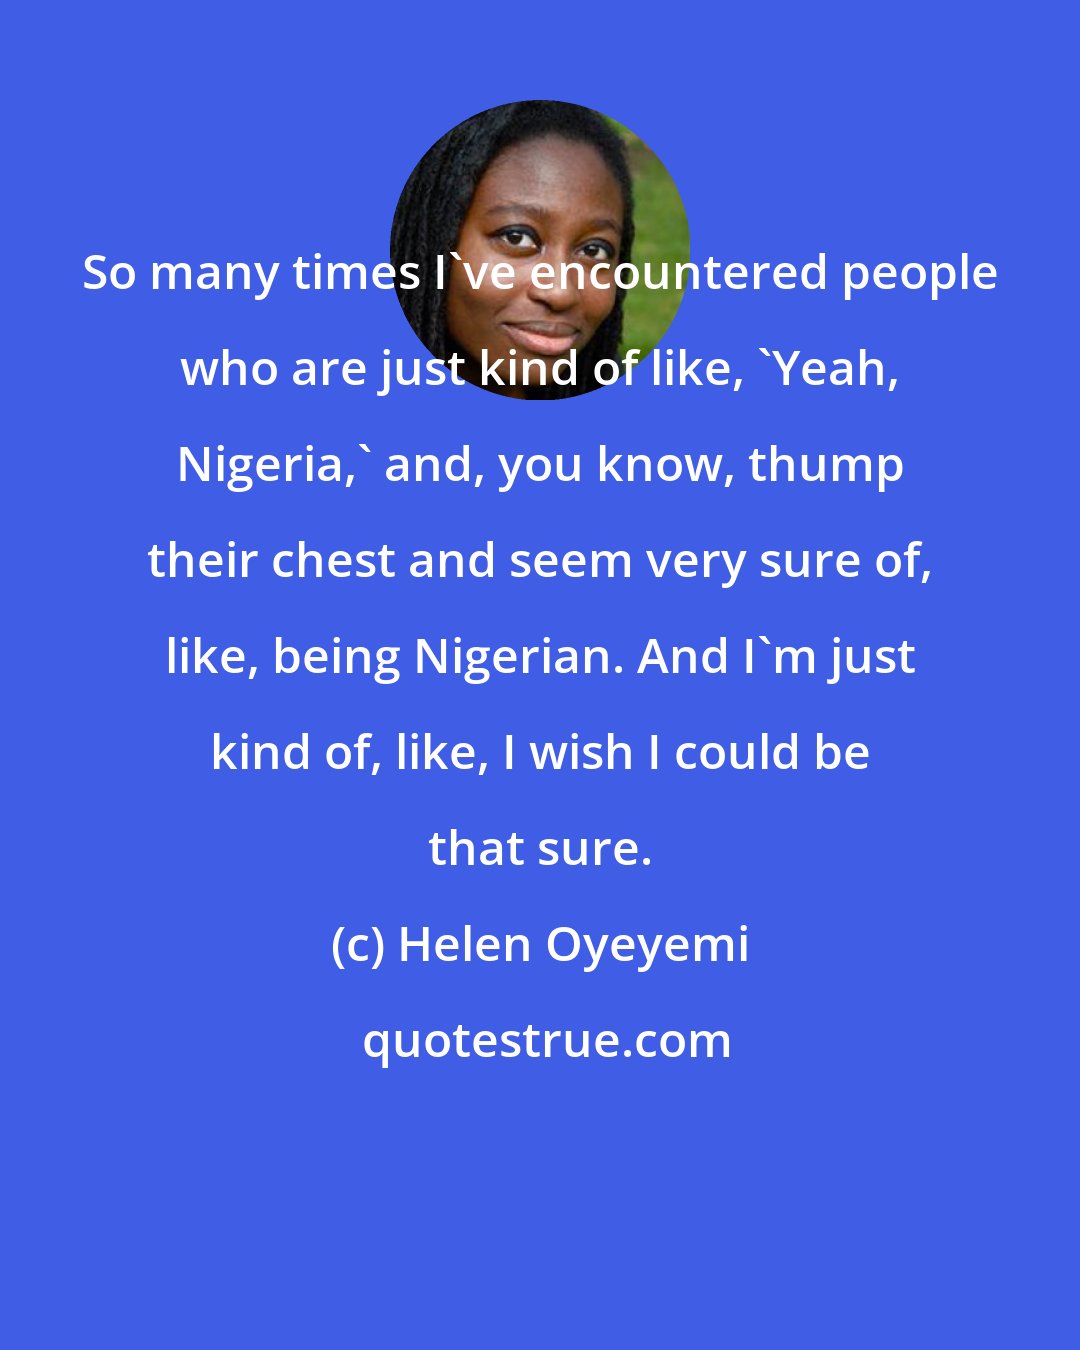 Helen Oyeyemi: So many times I've encountered people who are just kind of like, 'Yeah, Nigeria,' and, you know, thump their chest and seem very sure of, like, being Nigerian. And I'm just kind of, like, I wish I could be that sure.